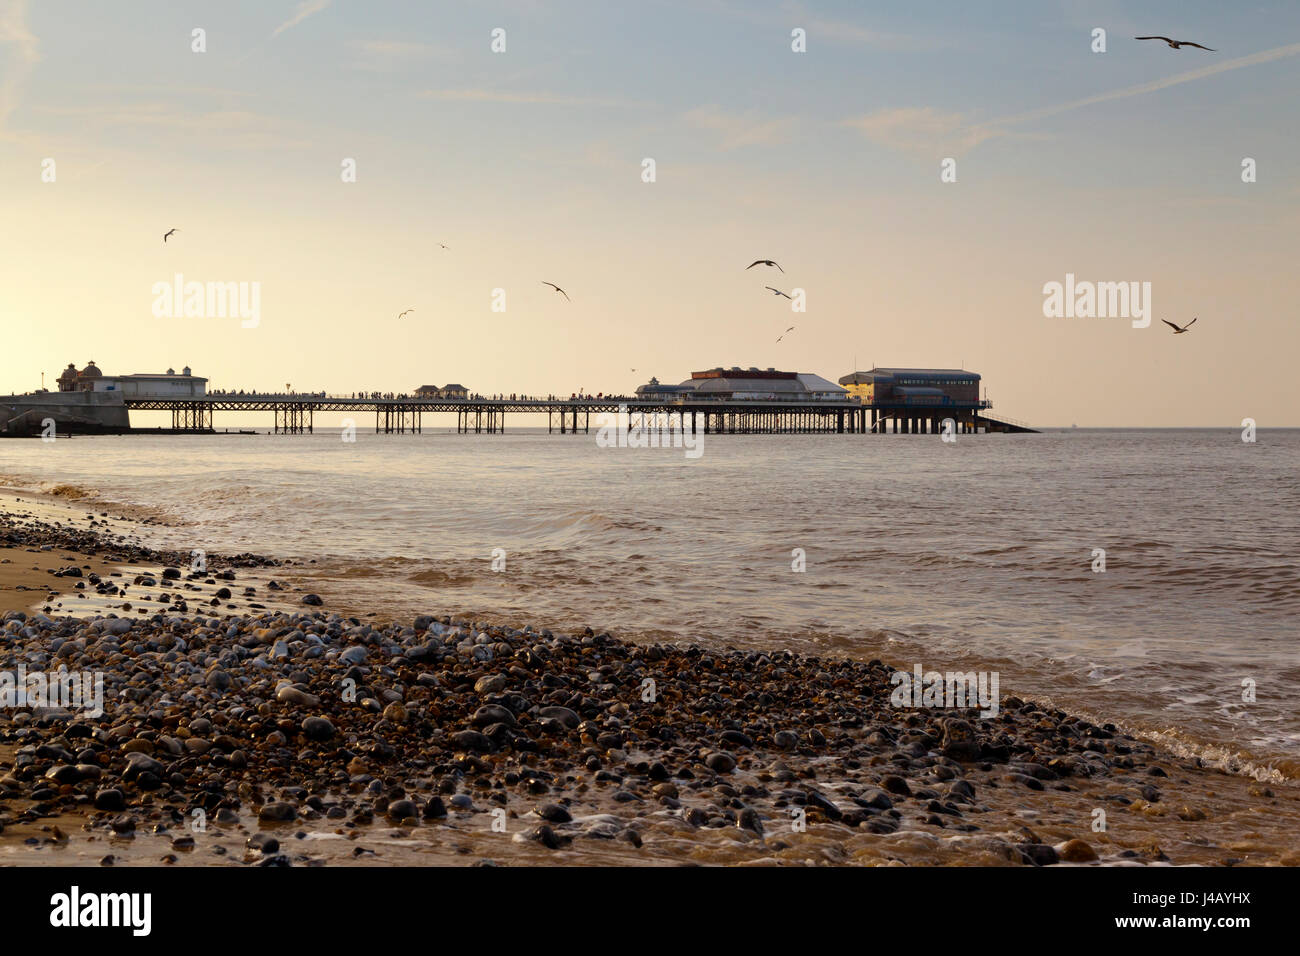 Cromer Pier on the North Norfolk coast England UK built in 1902 Stock Photo